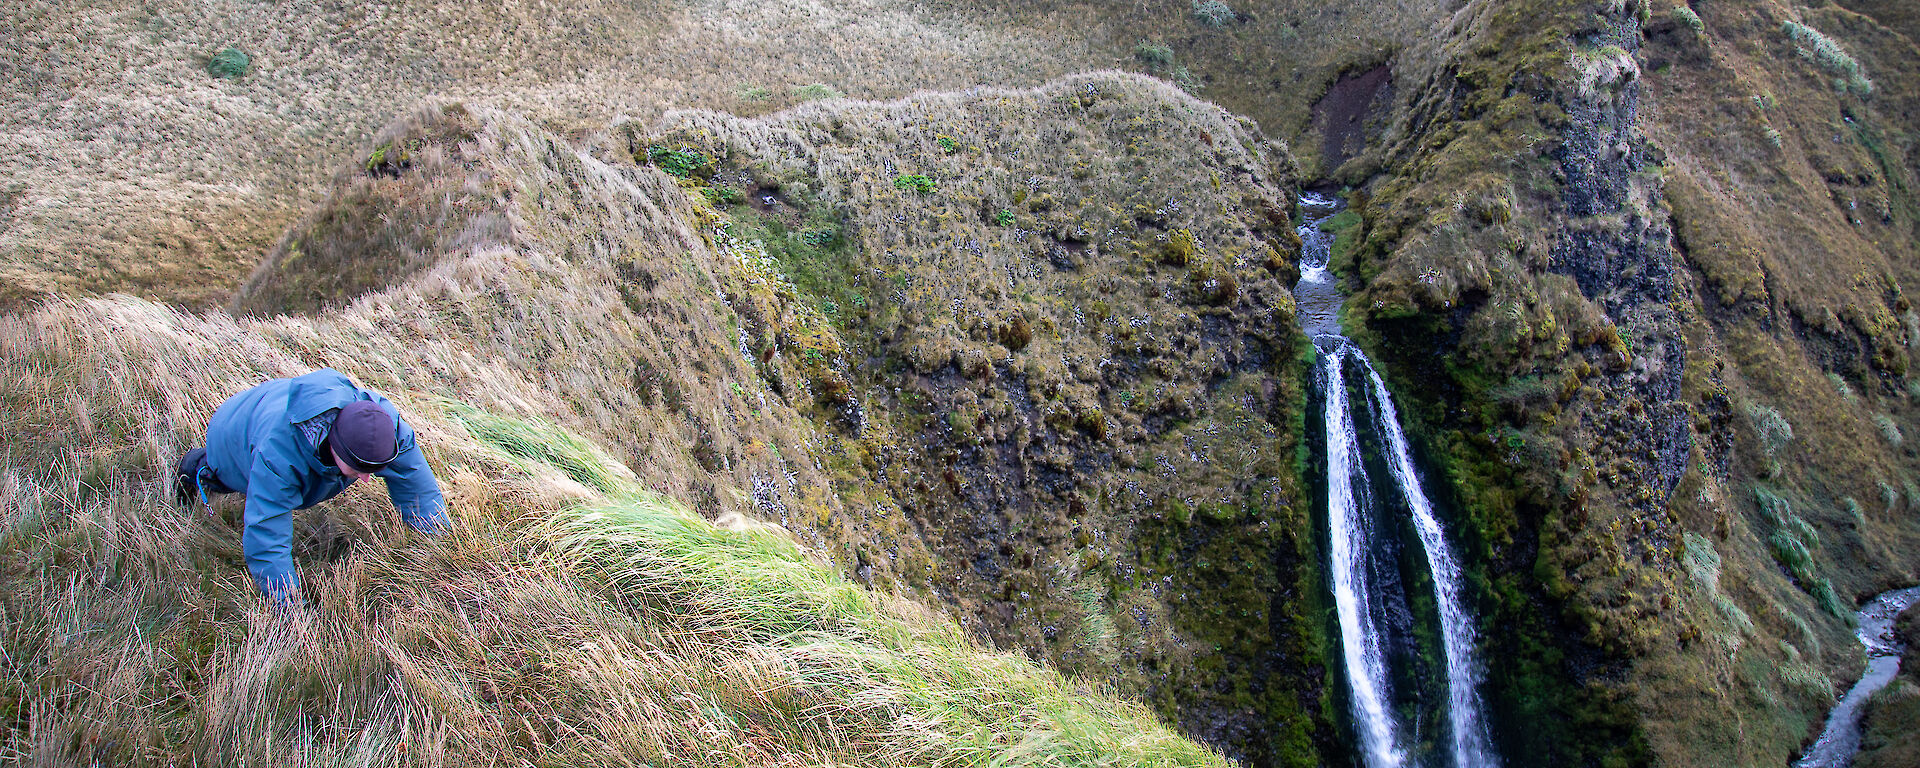 An expeditioner doing push ups on a ridge near a waterfall